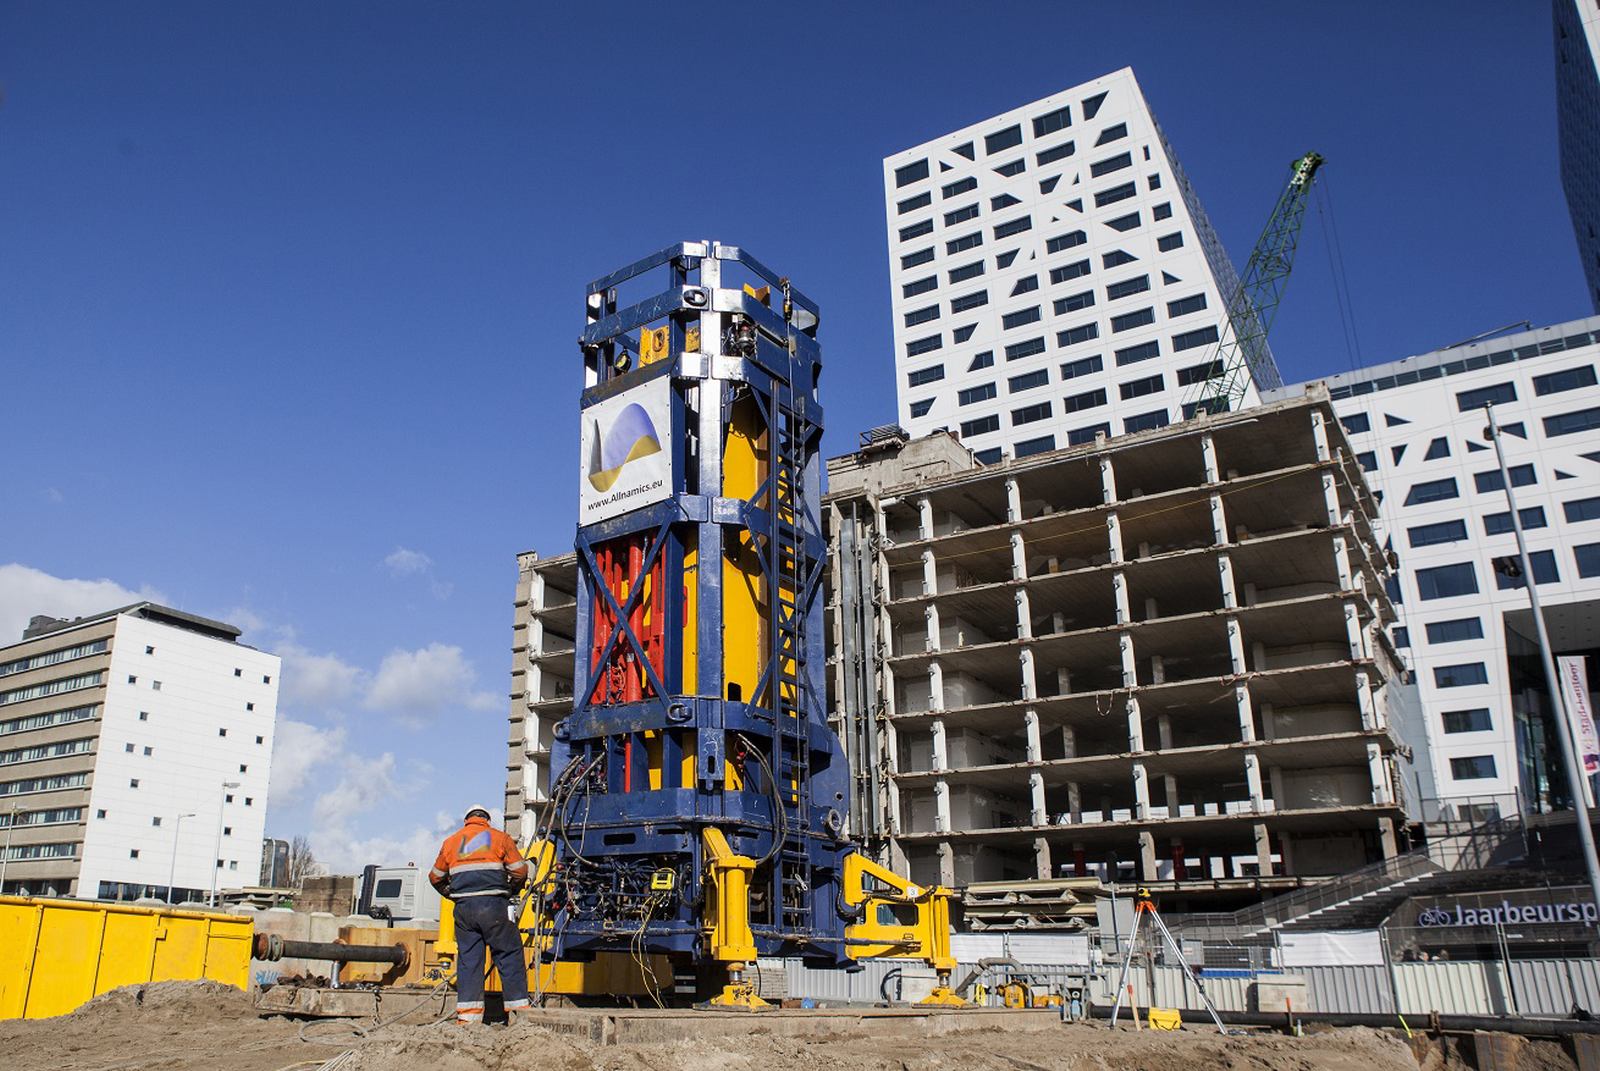 StatRapid device ready in Down Town Utrecht to perform Rapid Load Testing